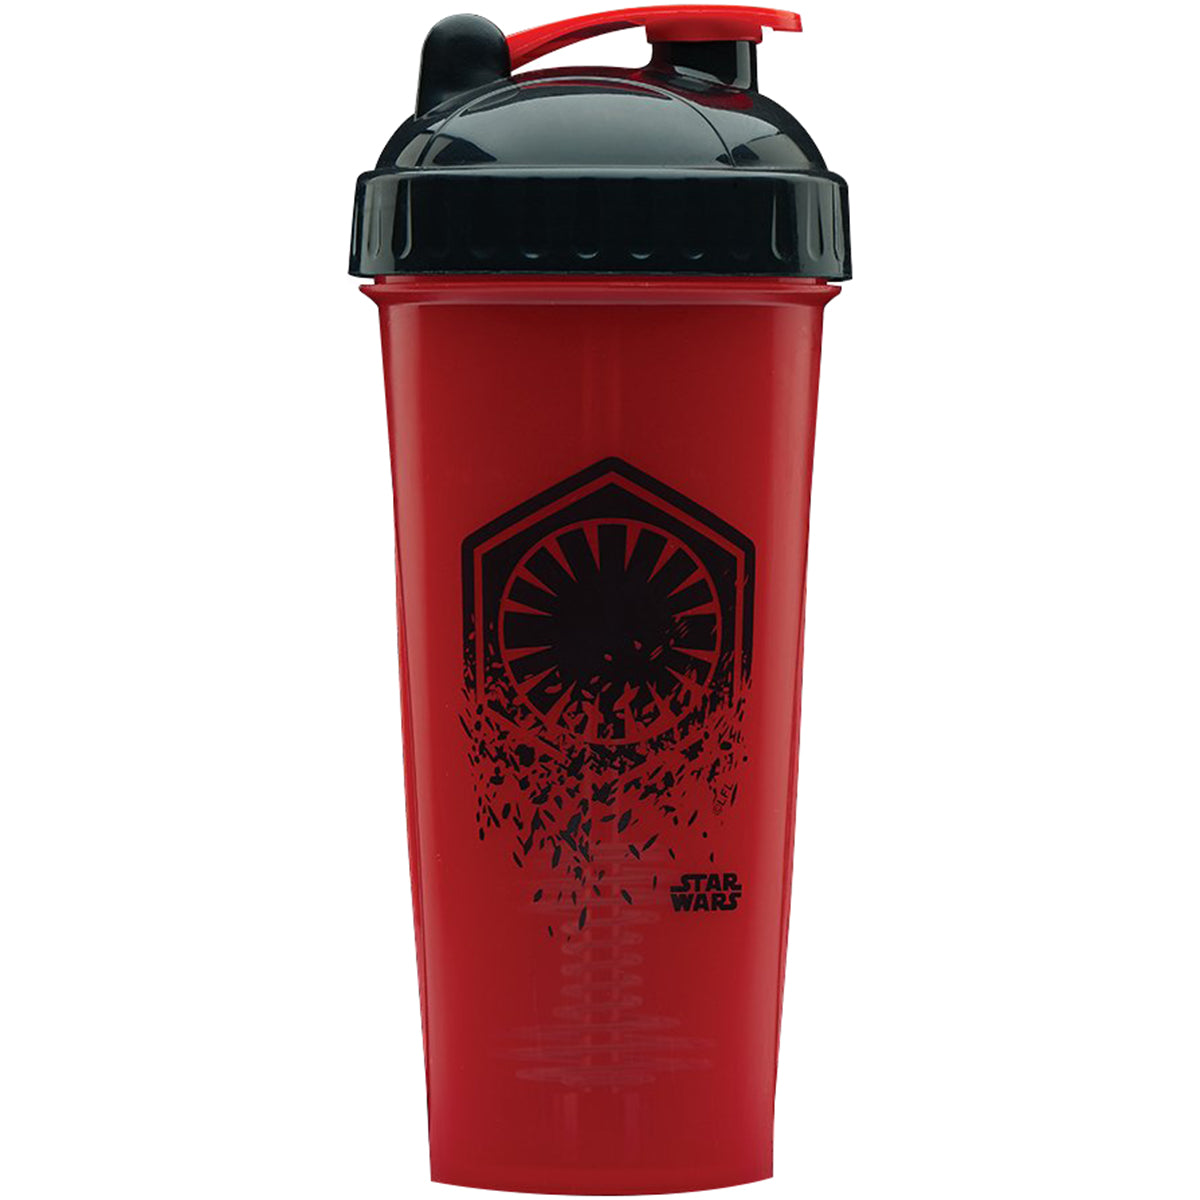 Performa PerfectShaker 28 oz. Star Wars Shaker Cup Bottle - First Order Icon PerfectShaker